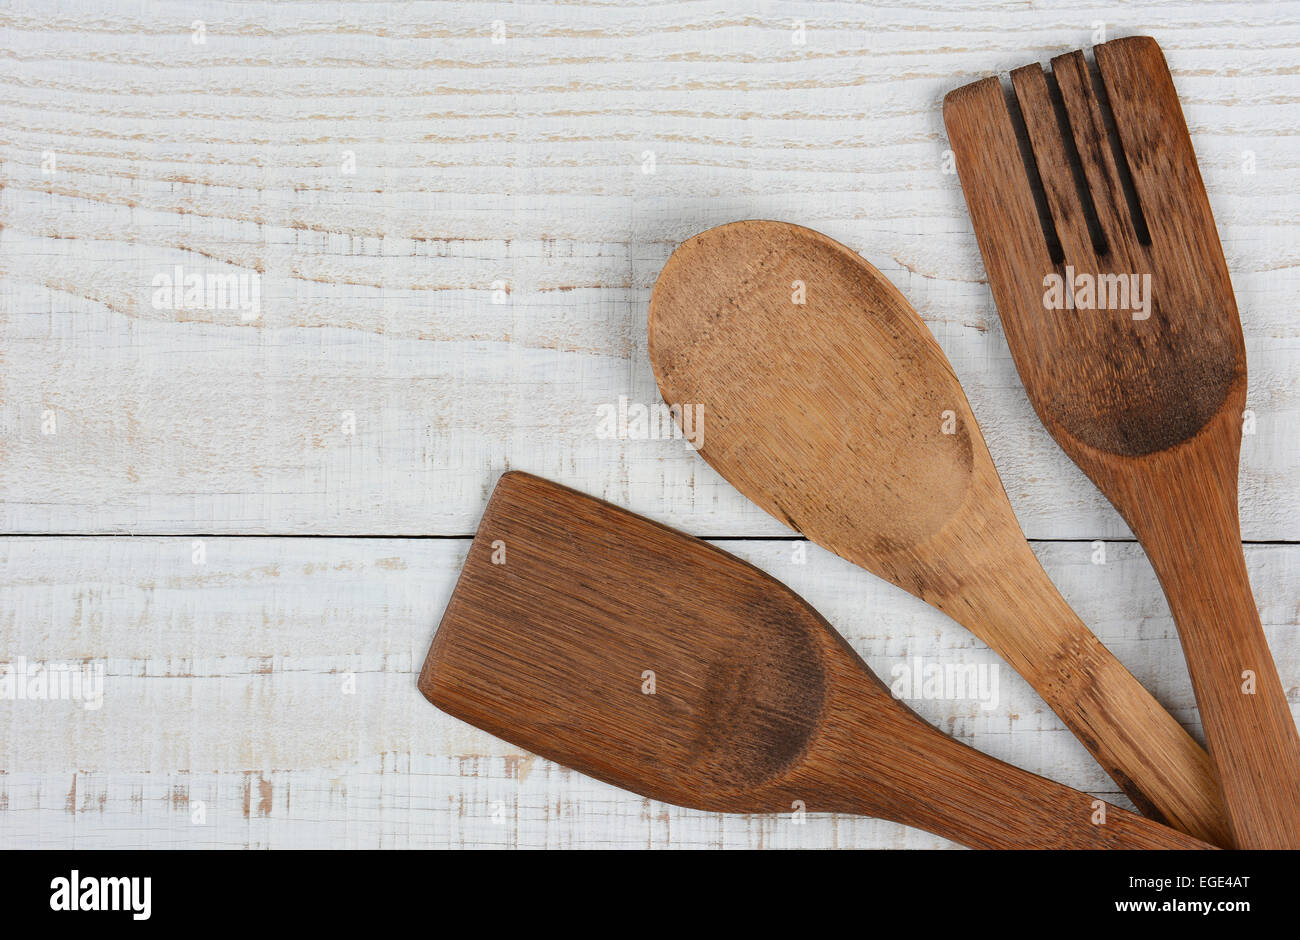 High angle shot of three wooden kitchen utensils in the lower right corner of the frame. The spoon, fork, and spatula have their Stock Photo